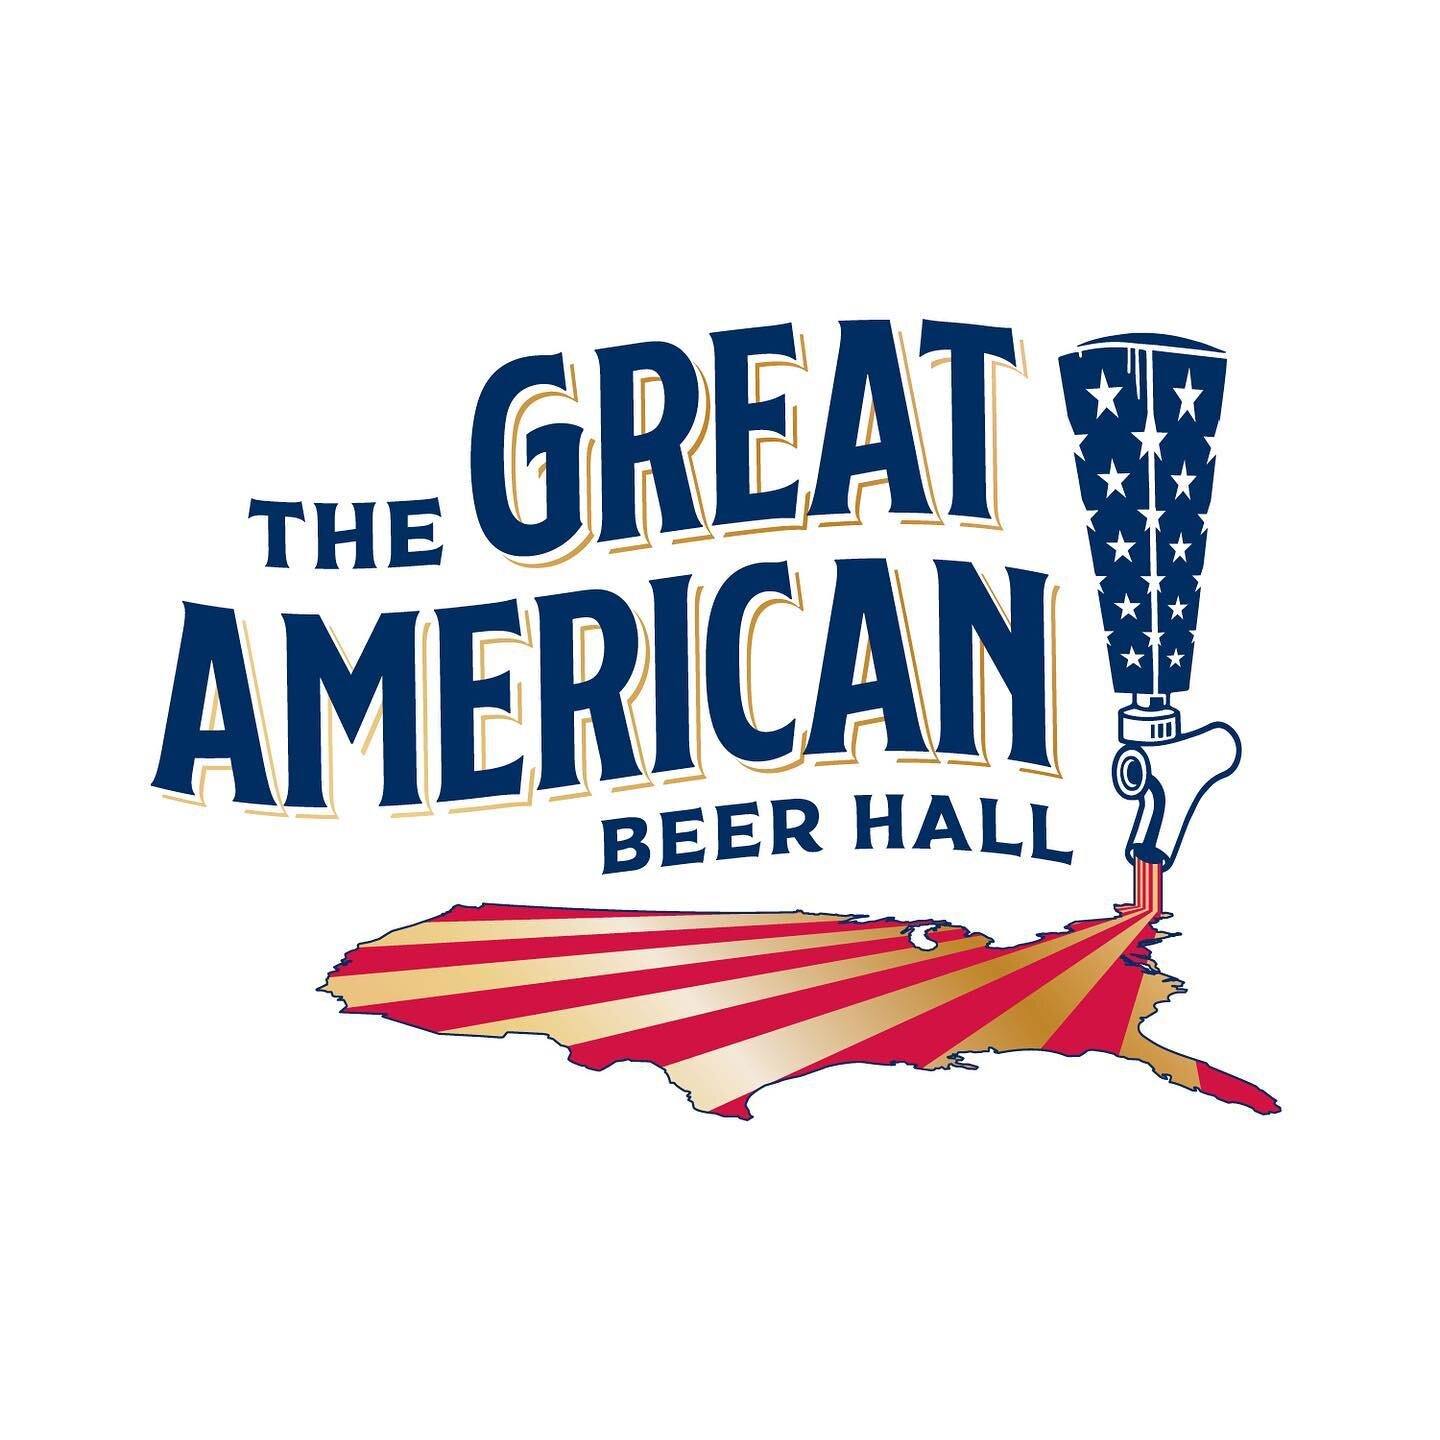 Visual brand identity for Great American Beer Hall 🍺 coming to Medford, MA in 2024. Keep tabs at gabhall.com
.
.
.
#greatamericanbeerhall #medfordma #medfordbeer #medfordbrewery #likeminddesign #logodesign #logodesigner #beerhall #branddesigner #bos